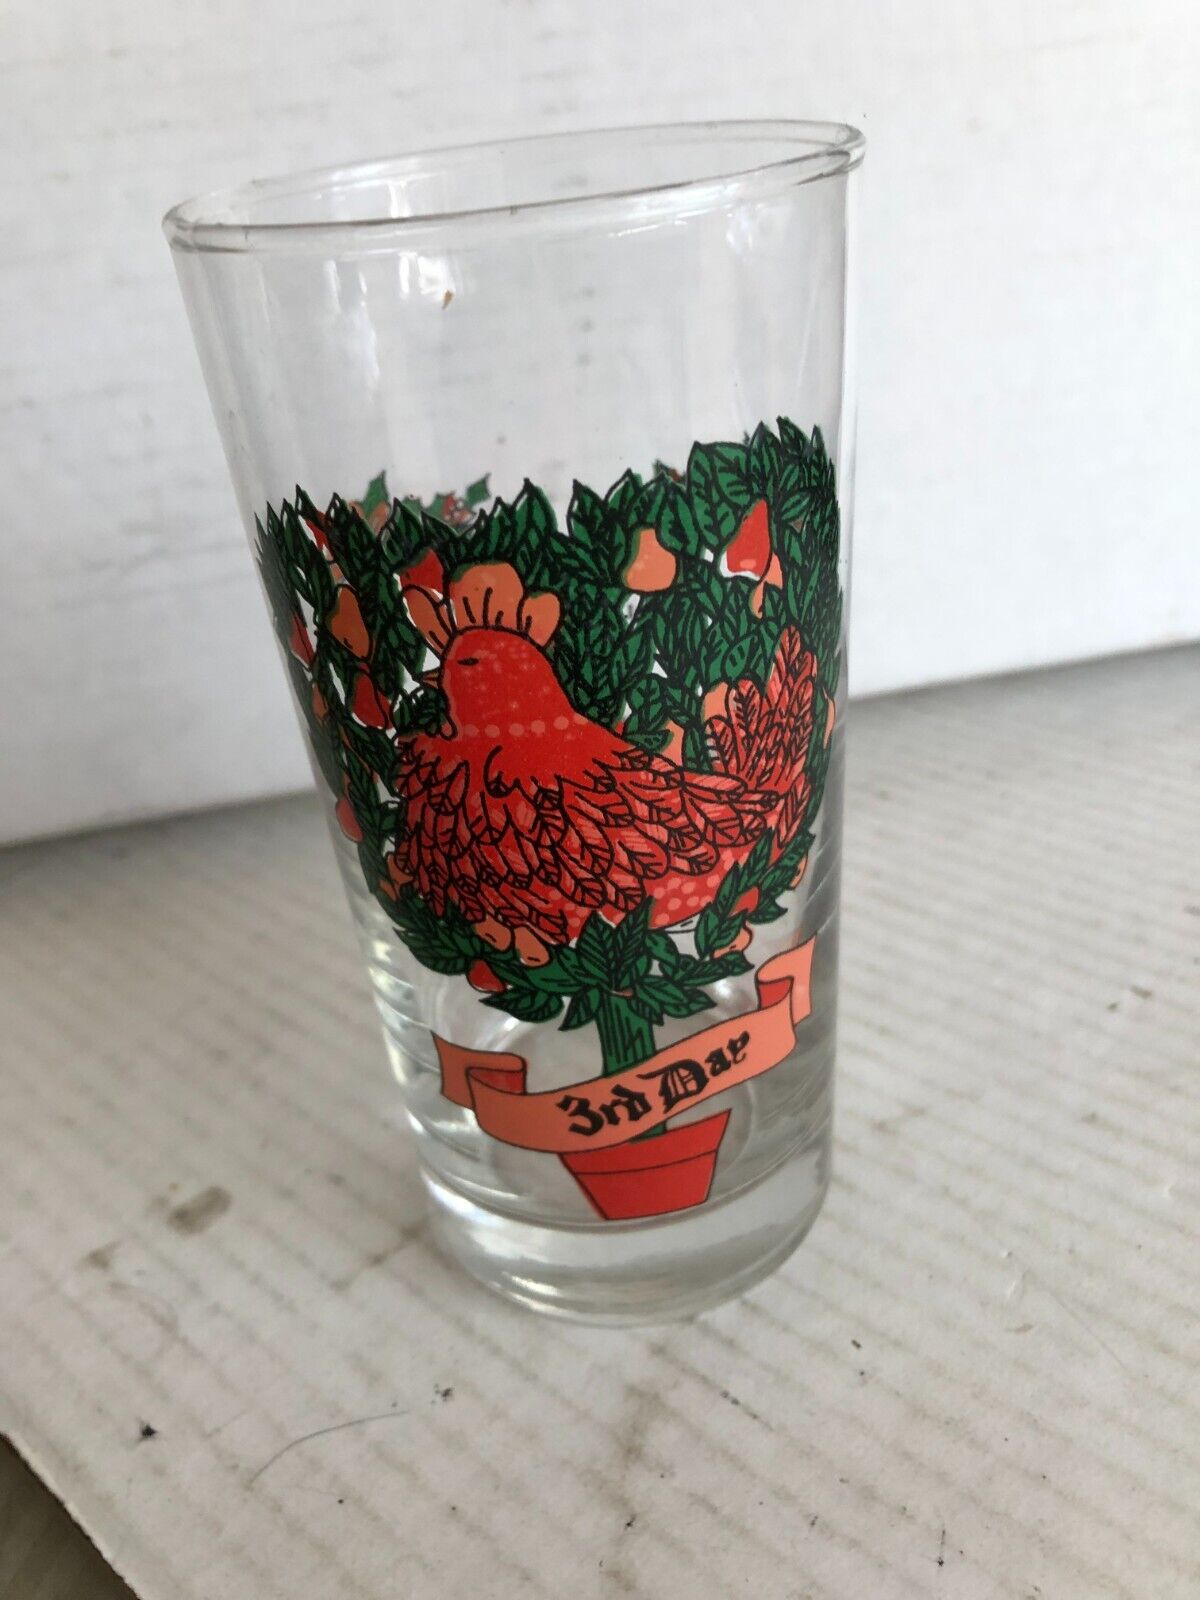 Vintage 3rd day 12 days of Christmas drinking glass Indiana Glass